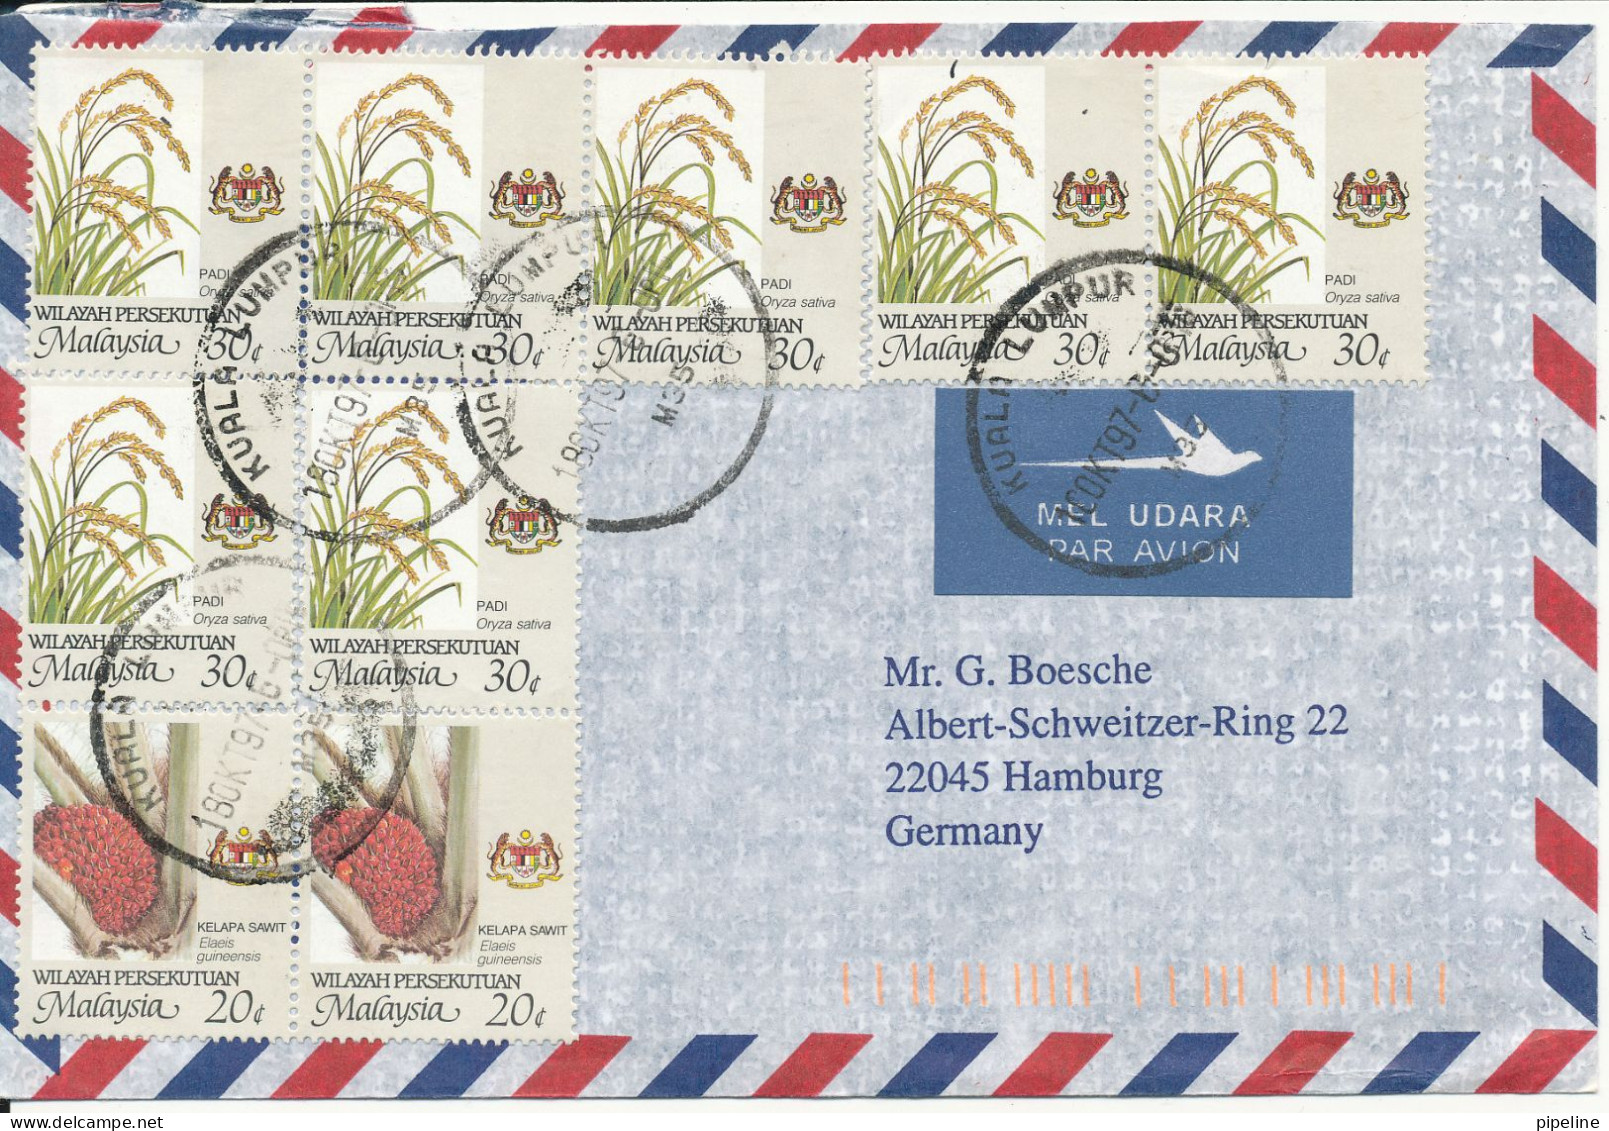 Malaysia Wilayah Persekutuan Air Mail Cover Sent To Germany 18-10-1997 - Maleisië (1964-...)